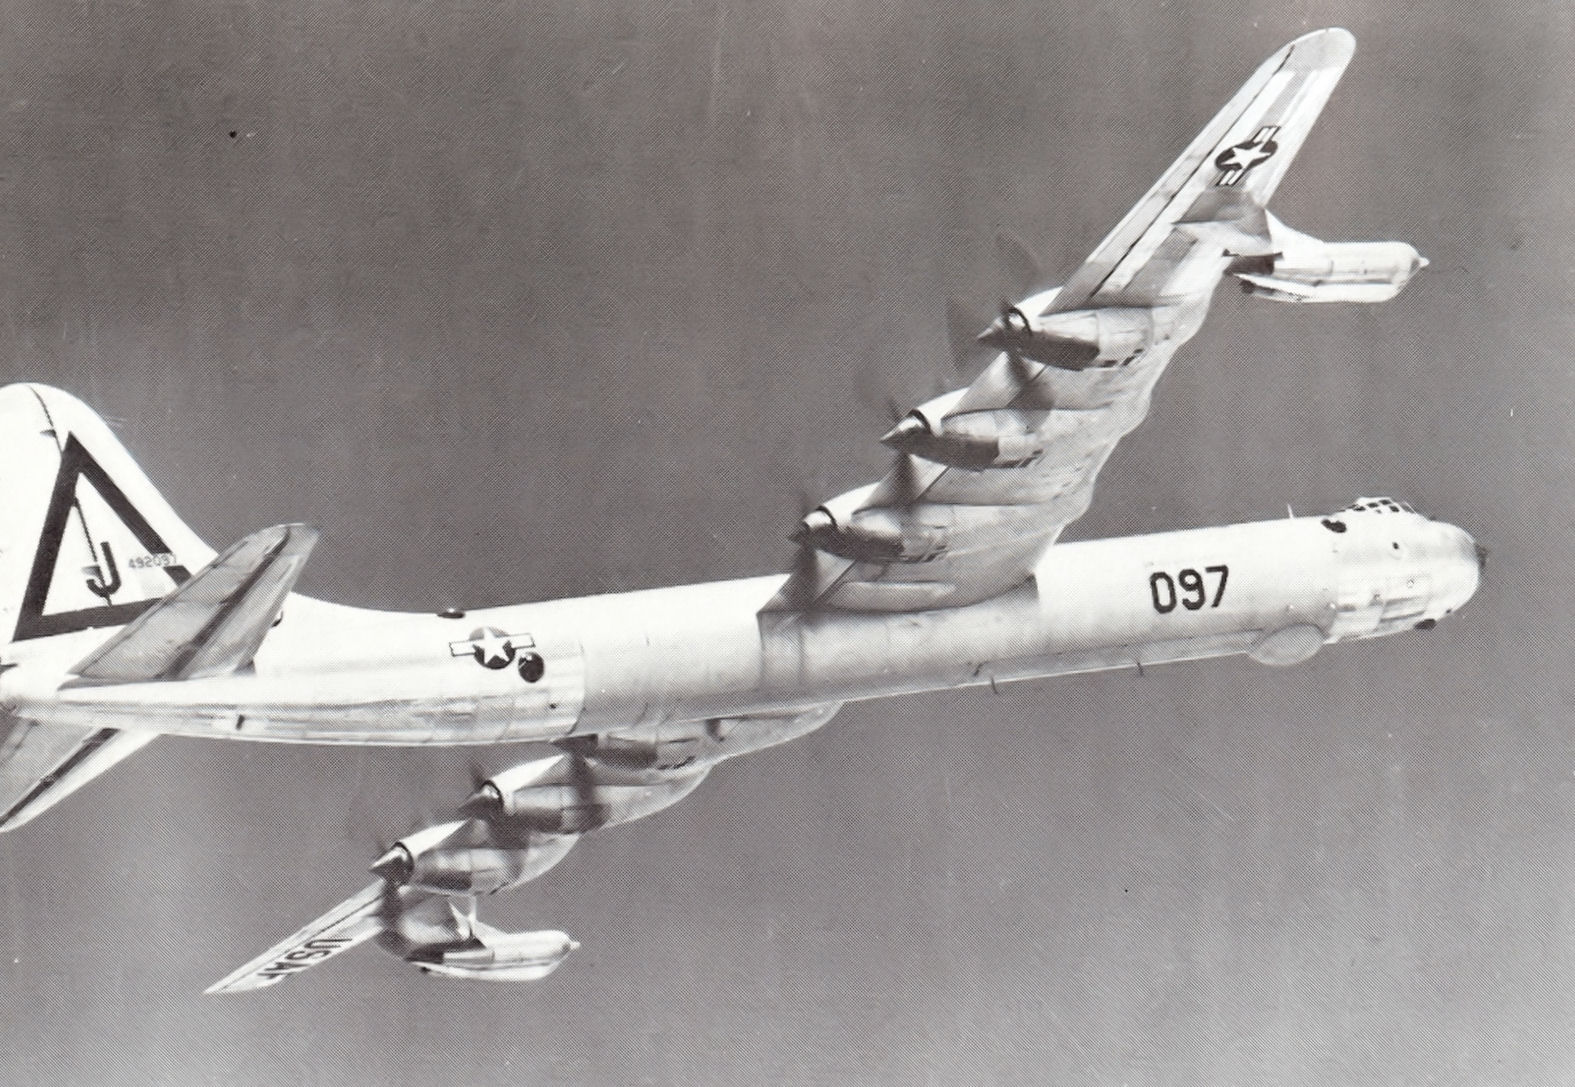 B-36 in flight from a downward angle.